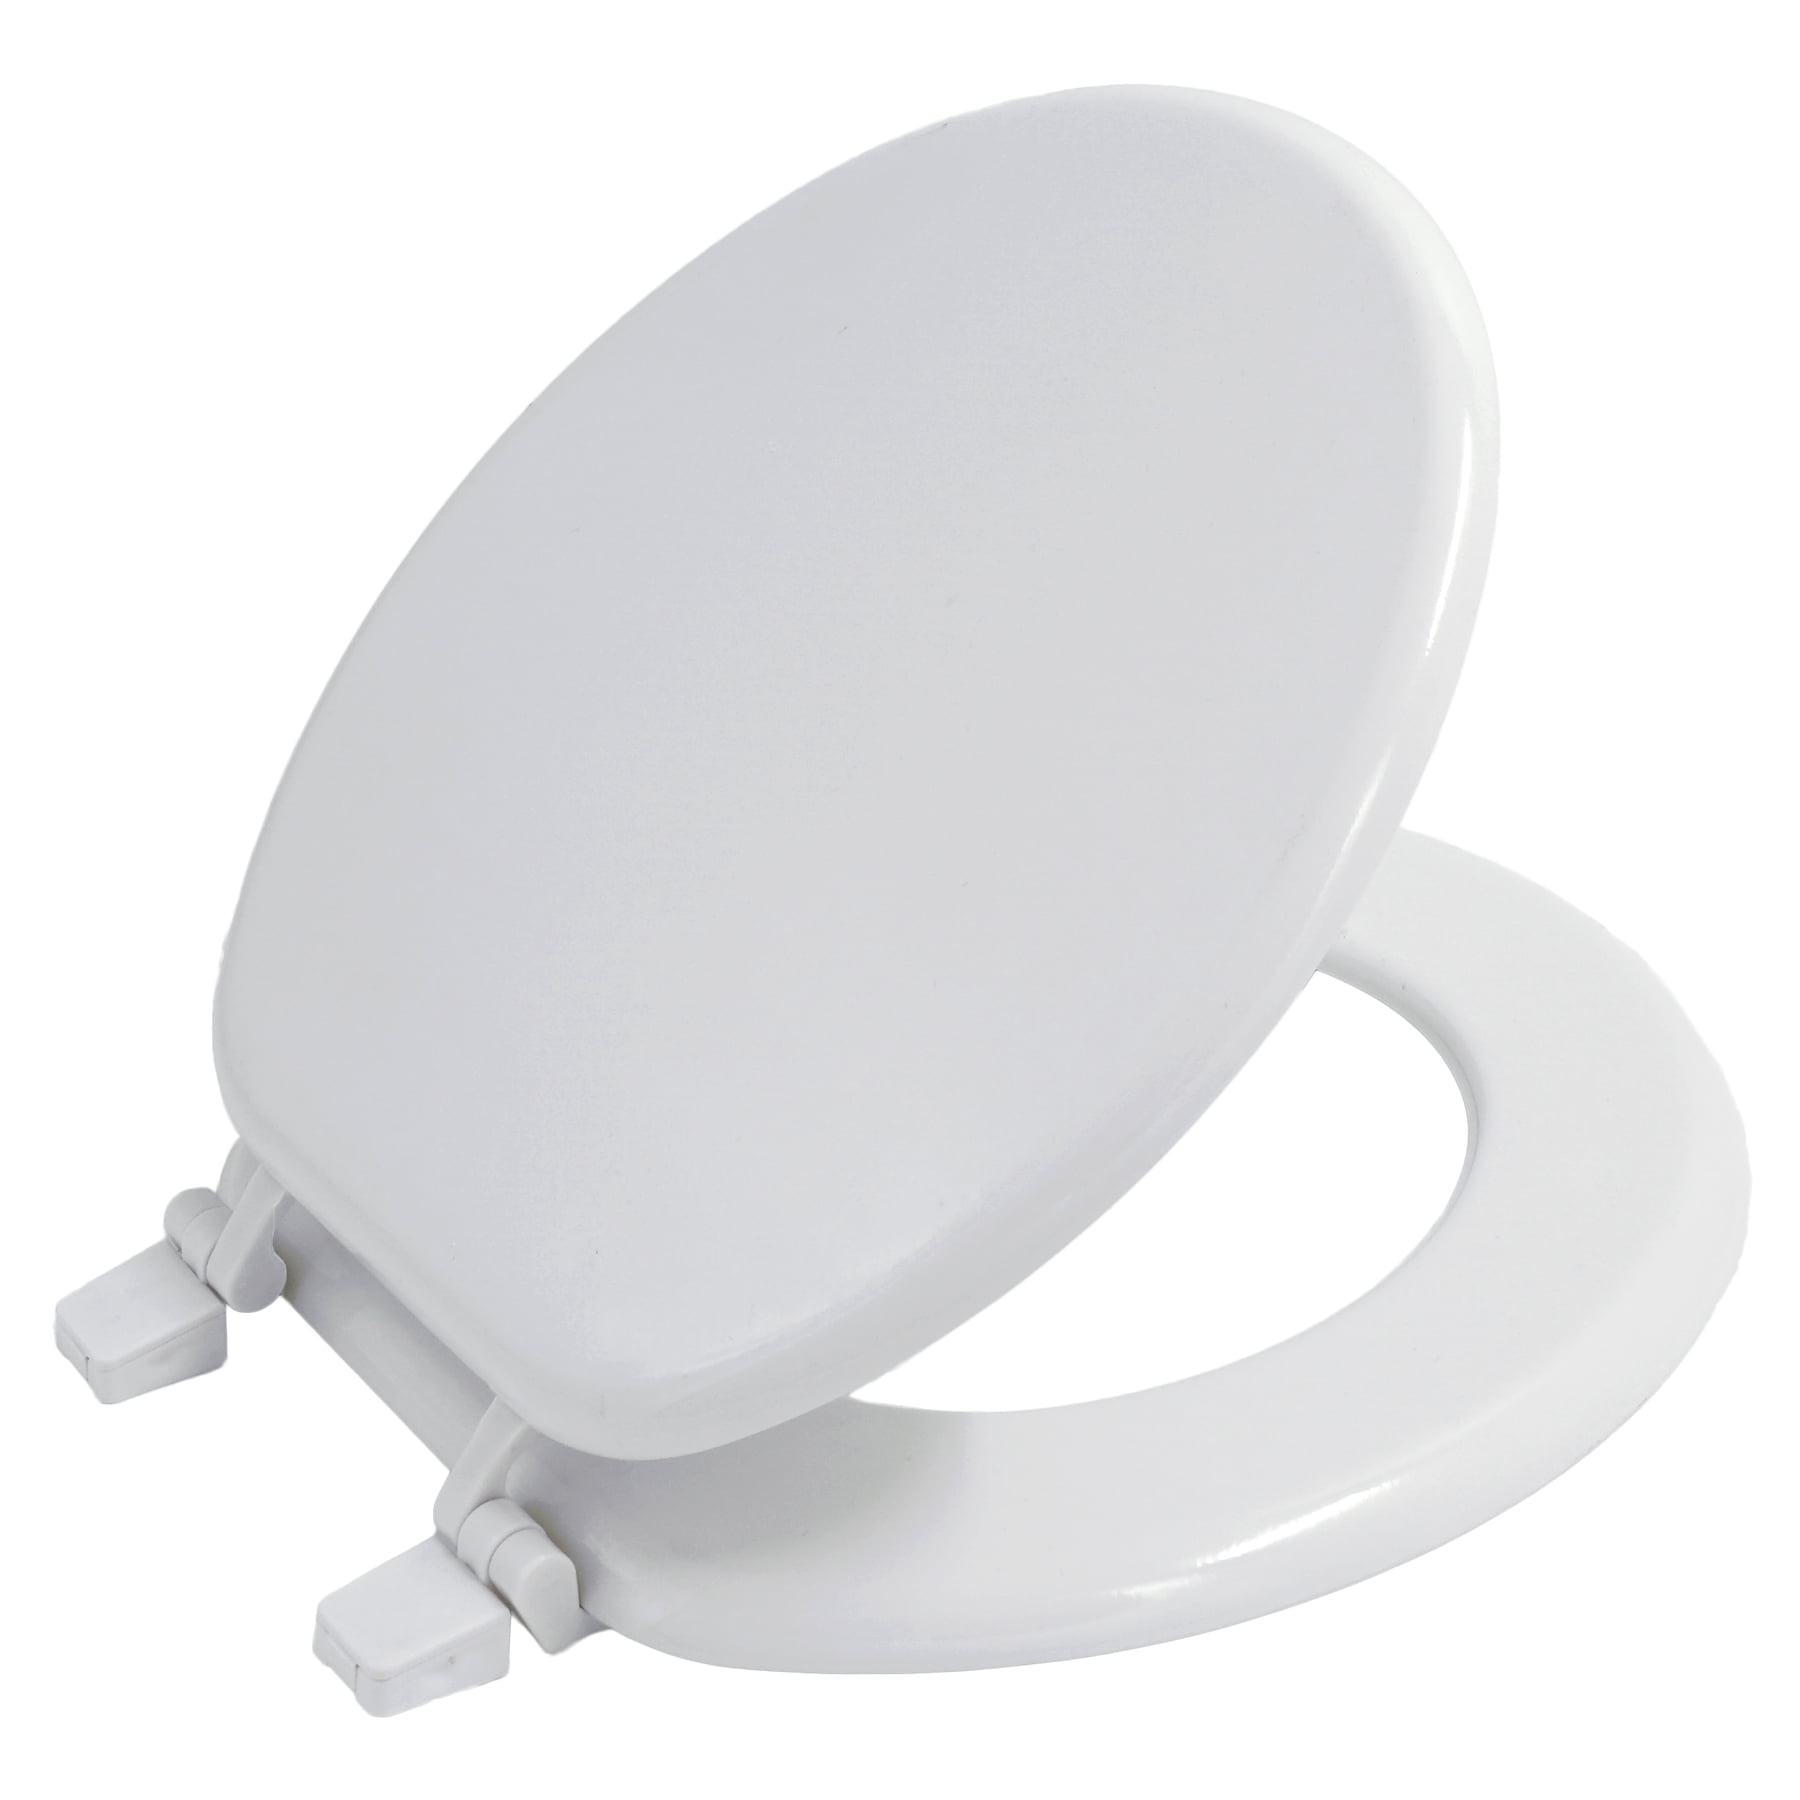 BRAND NEW 18" WHITE WOODEN TOILET SEAT FITTINGS BATHROOM ACCESSORIES COMFORTABLE 